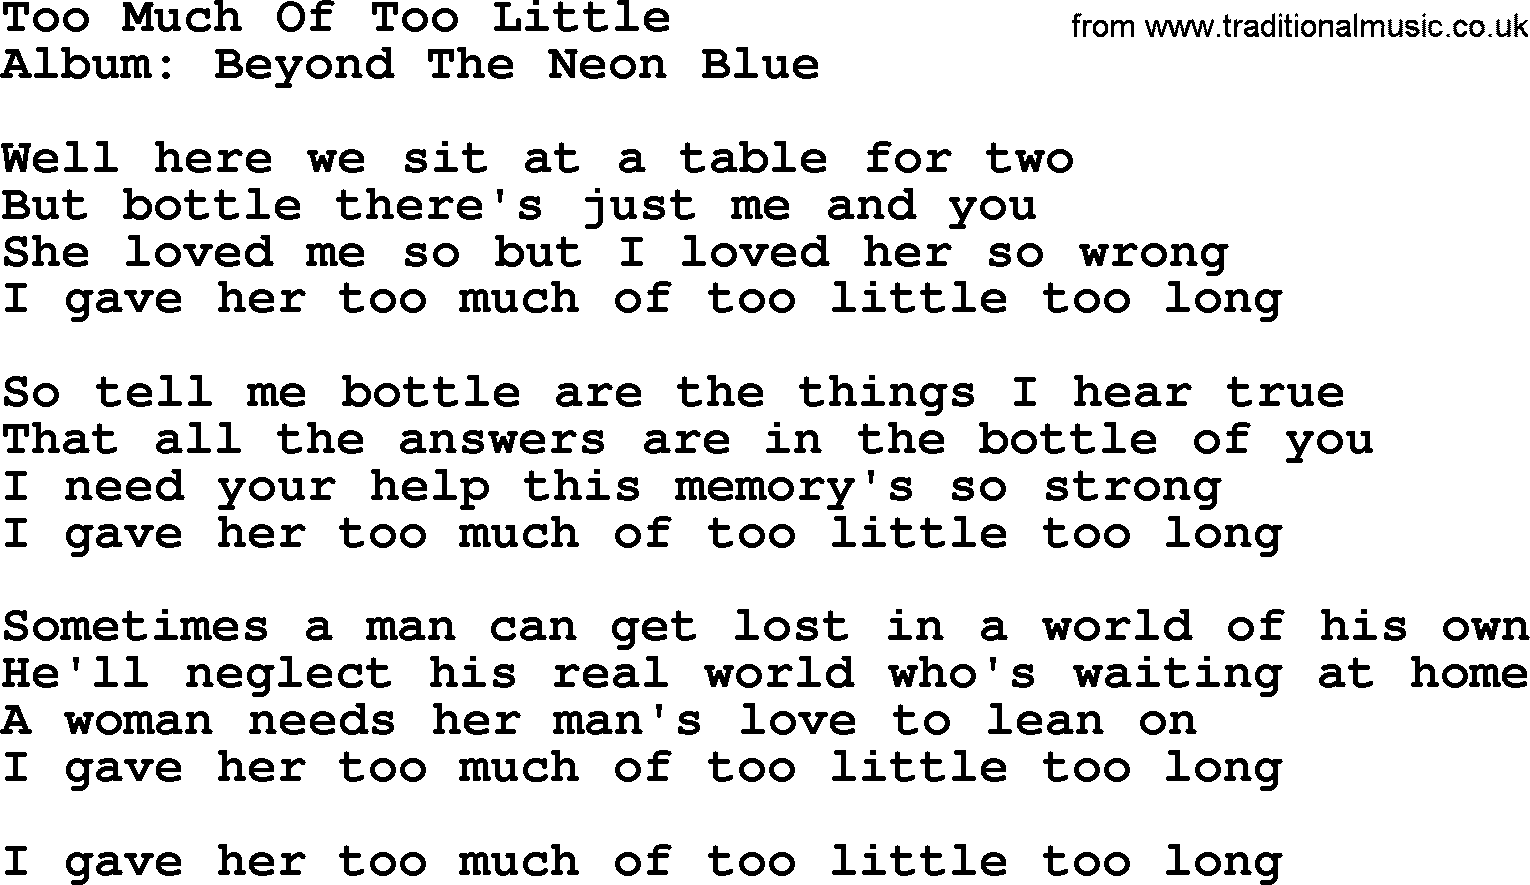 George Strait song: Too Much Of Too Little, lyrics